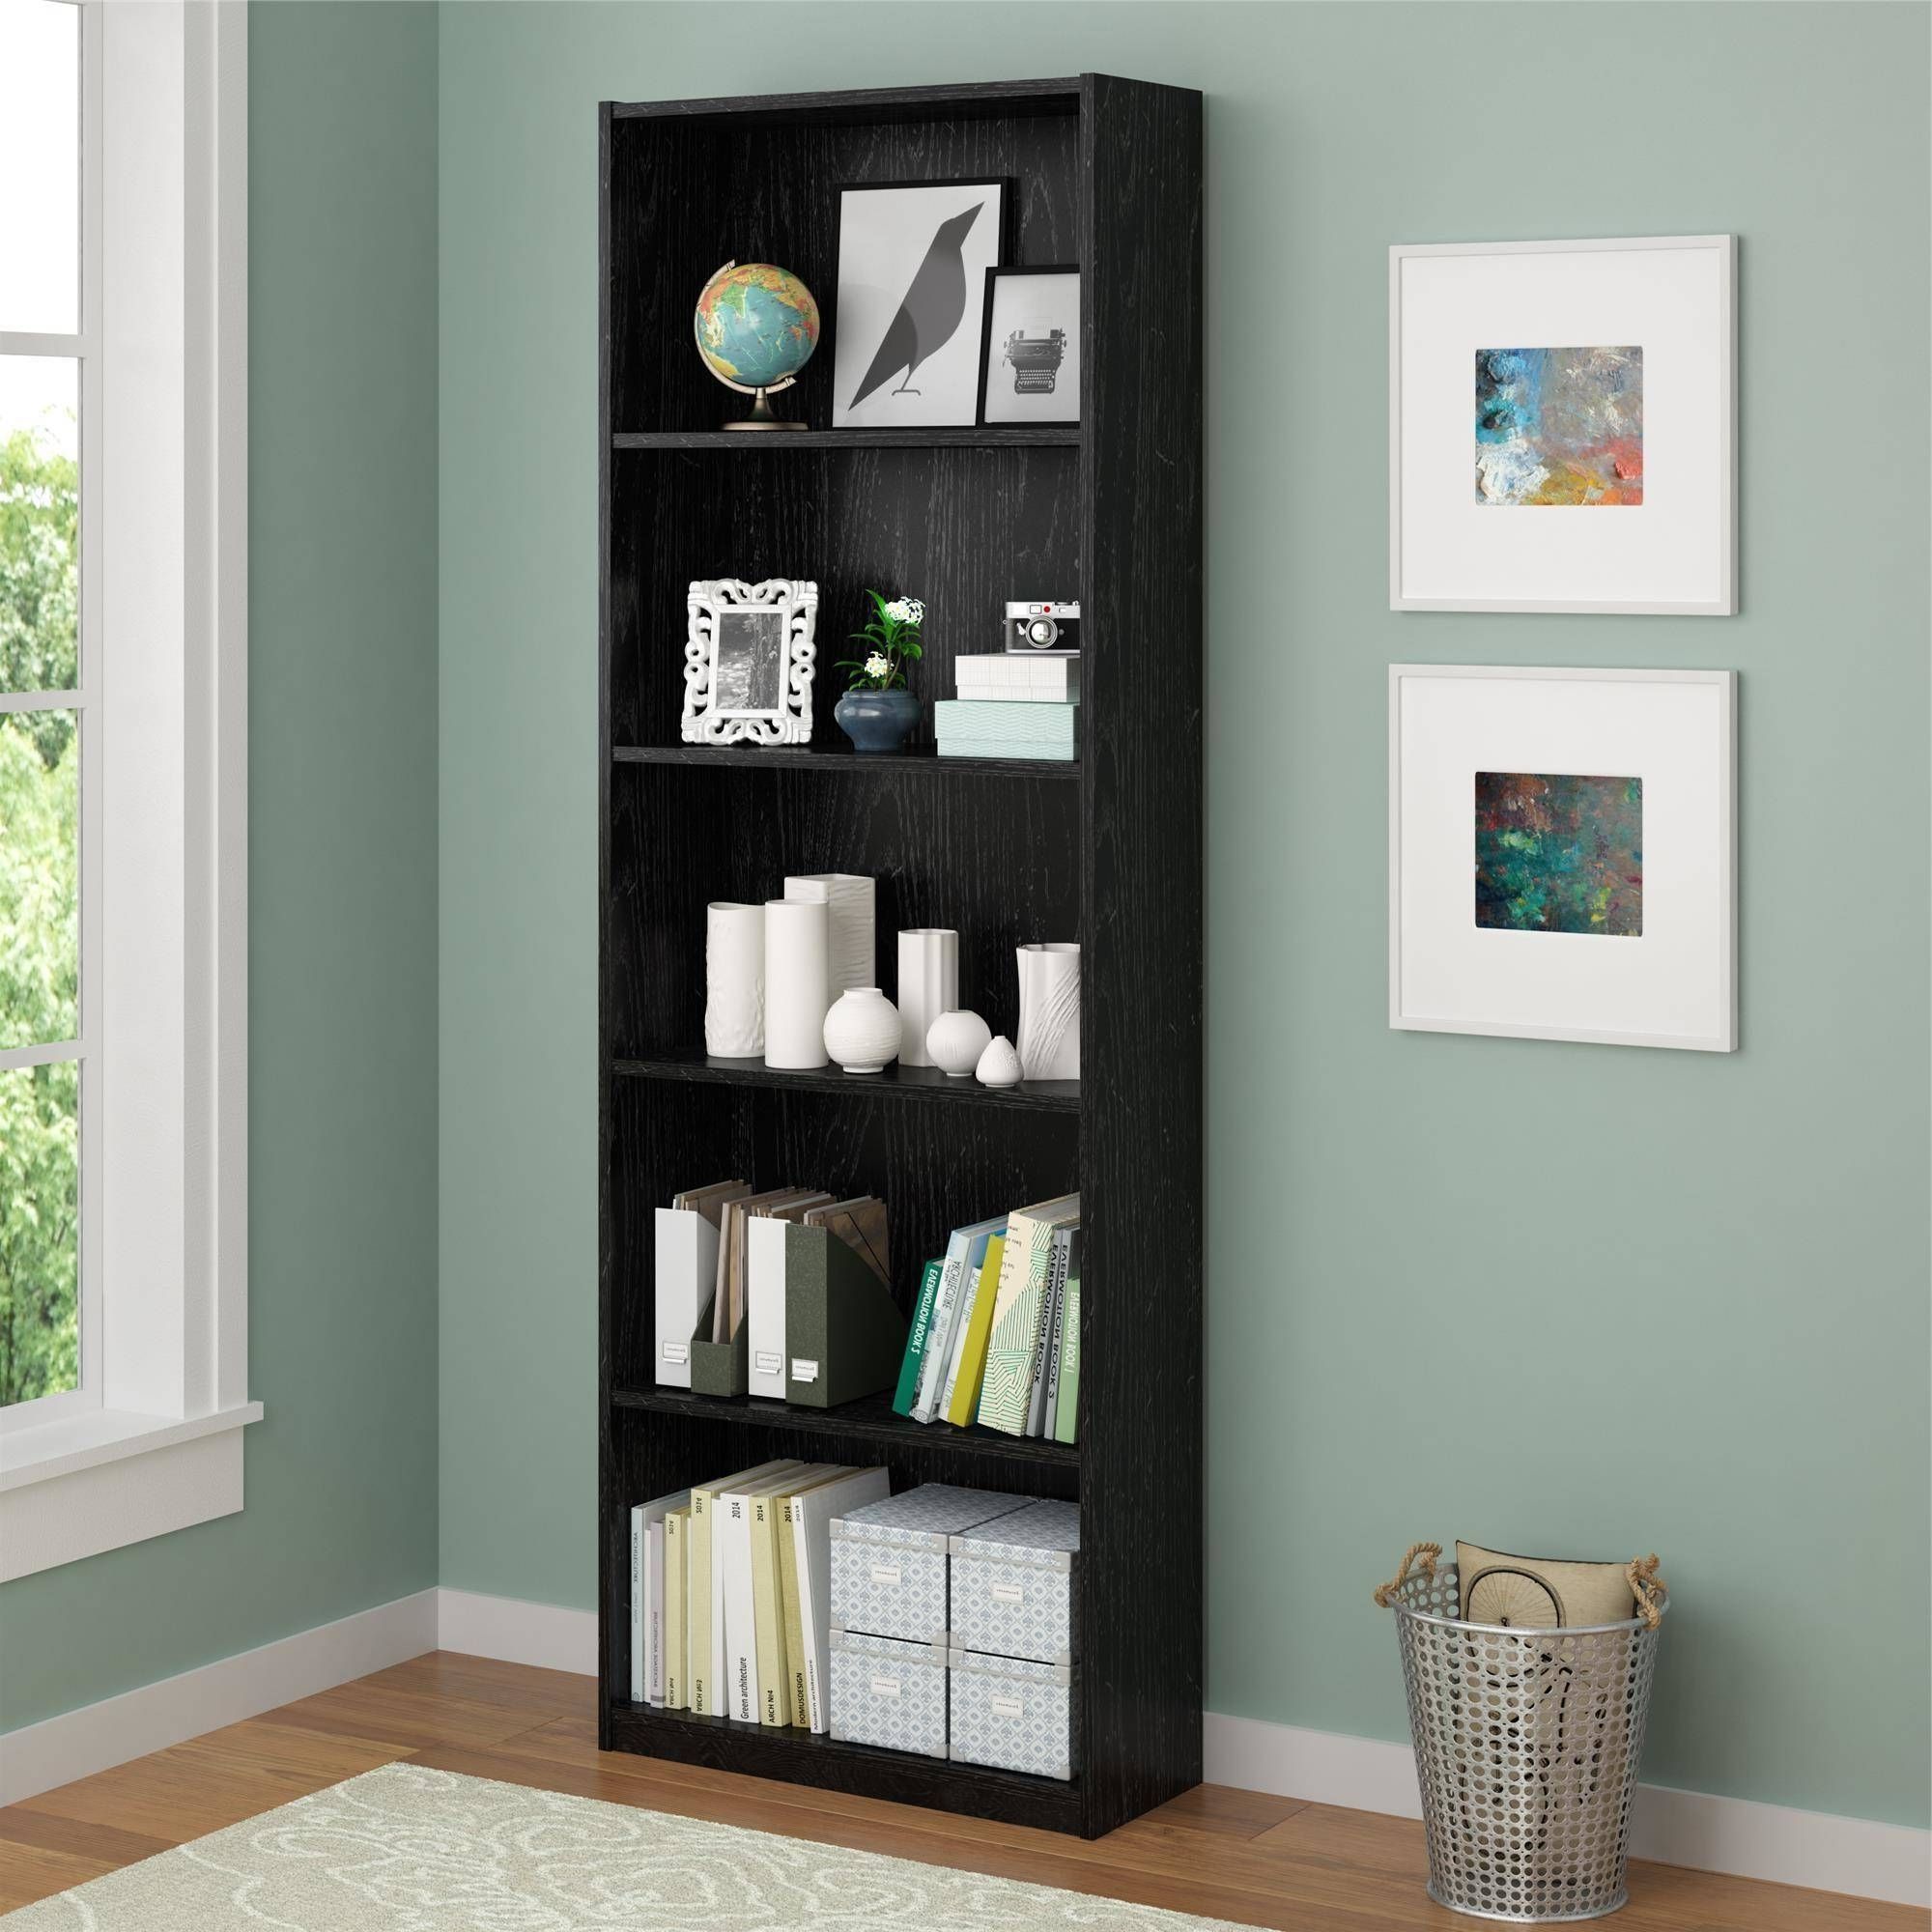 Latest Ameriwood 5 Shelf Bookcases, Set Of 2 (mix And Match) – Walmart With Walmart White Bookcases (View 6 of 15)